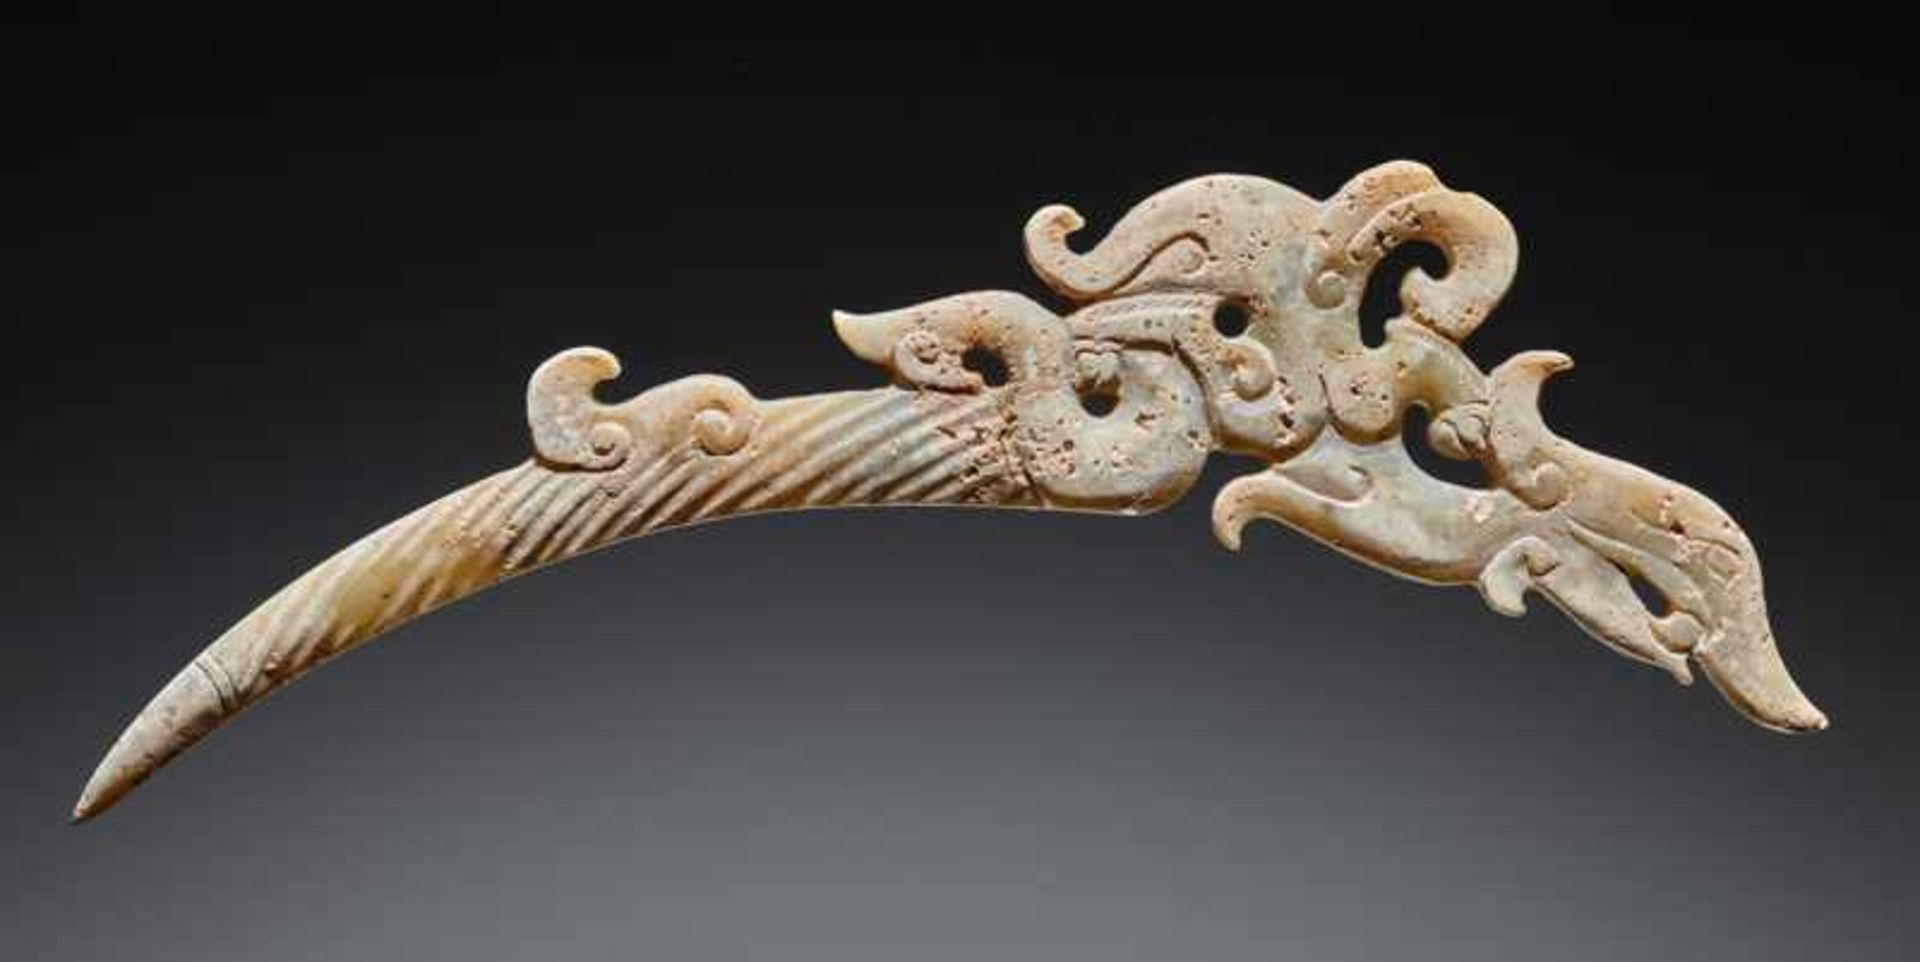 A UNIQUE ELEGANT AND DELICATELY CARVED DRAGON-SHAPED XI OR “KNOT-OPENER” Jade. China, EASTERN